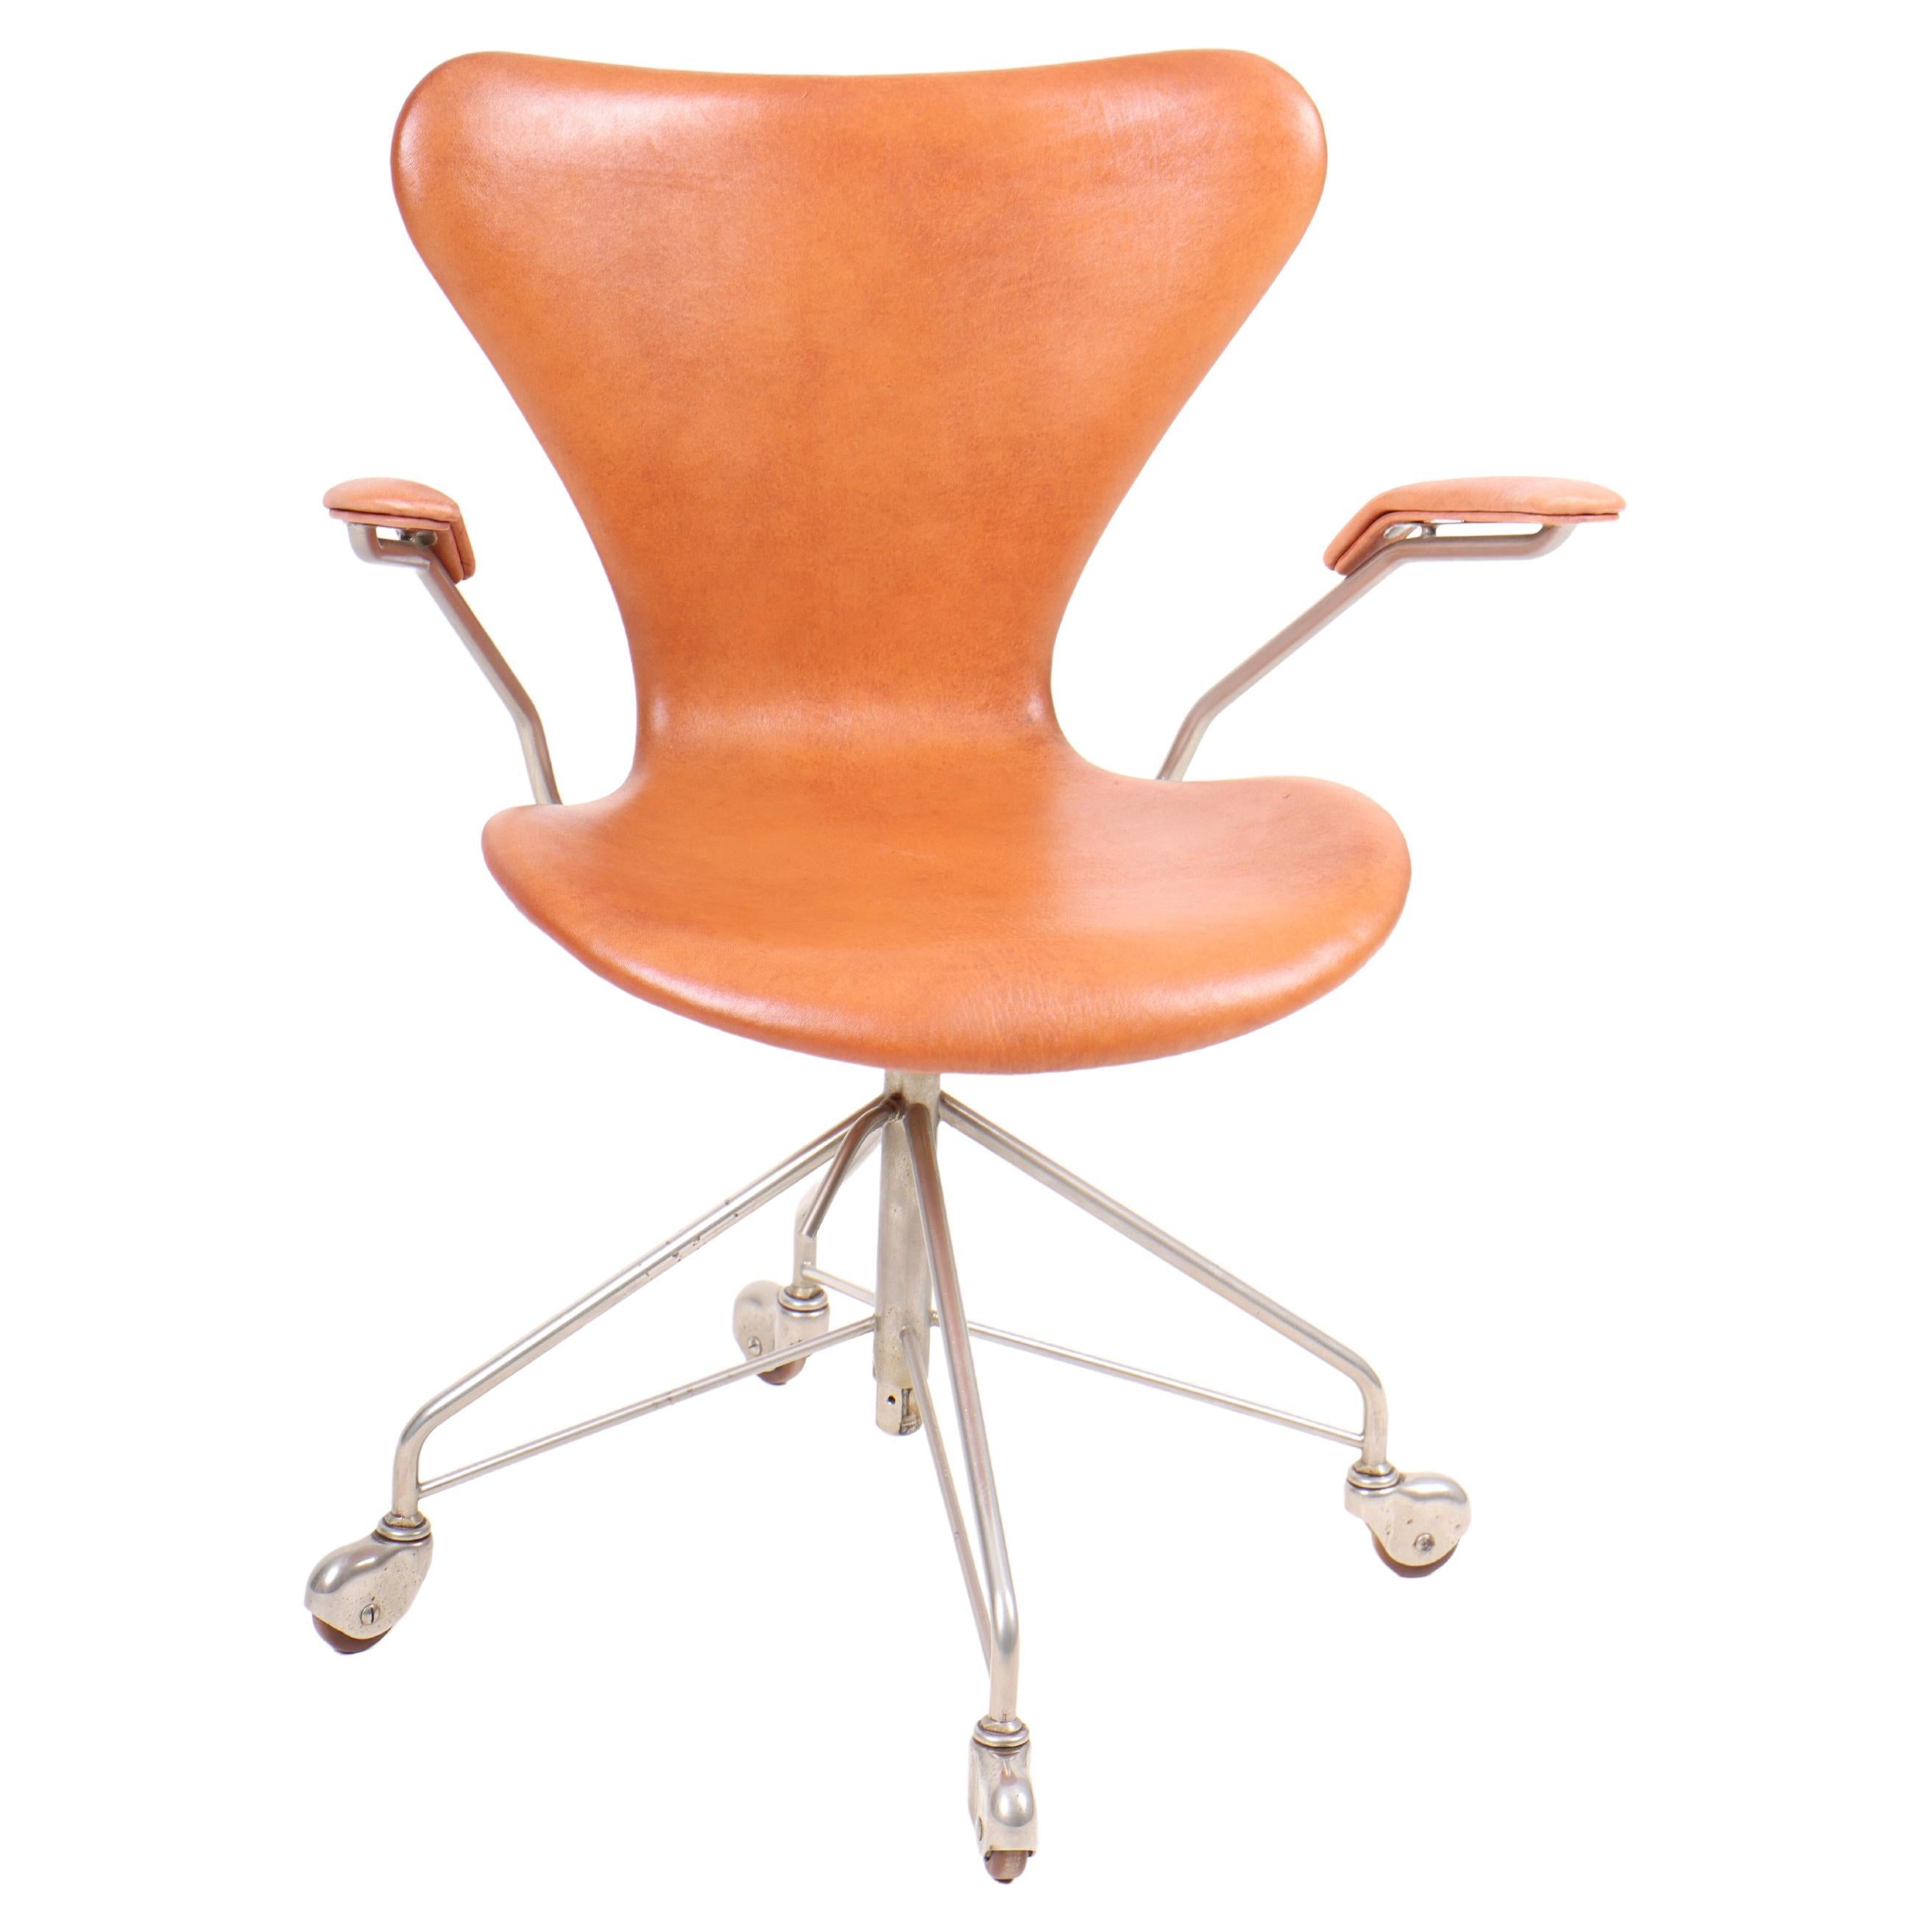 Scandinavian Modern Midcentury Desk Chair Model 3117 in Patinated Leather by Arne Jacobsen, 1960s